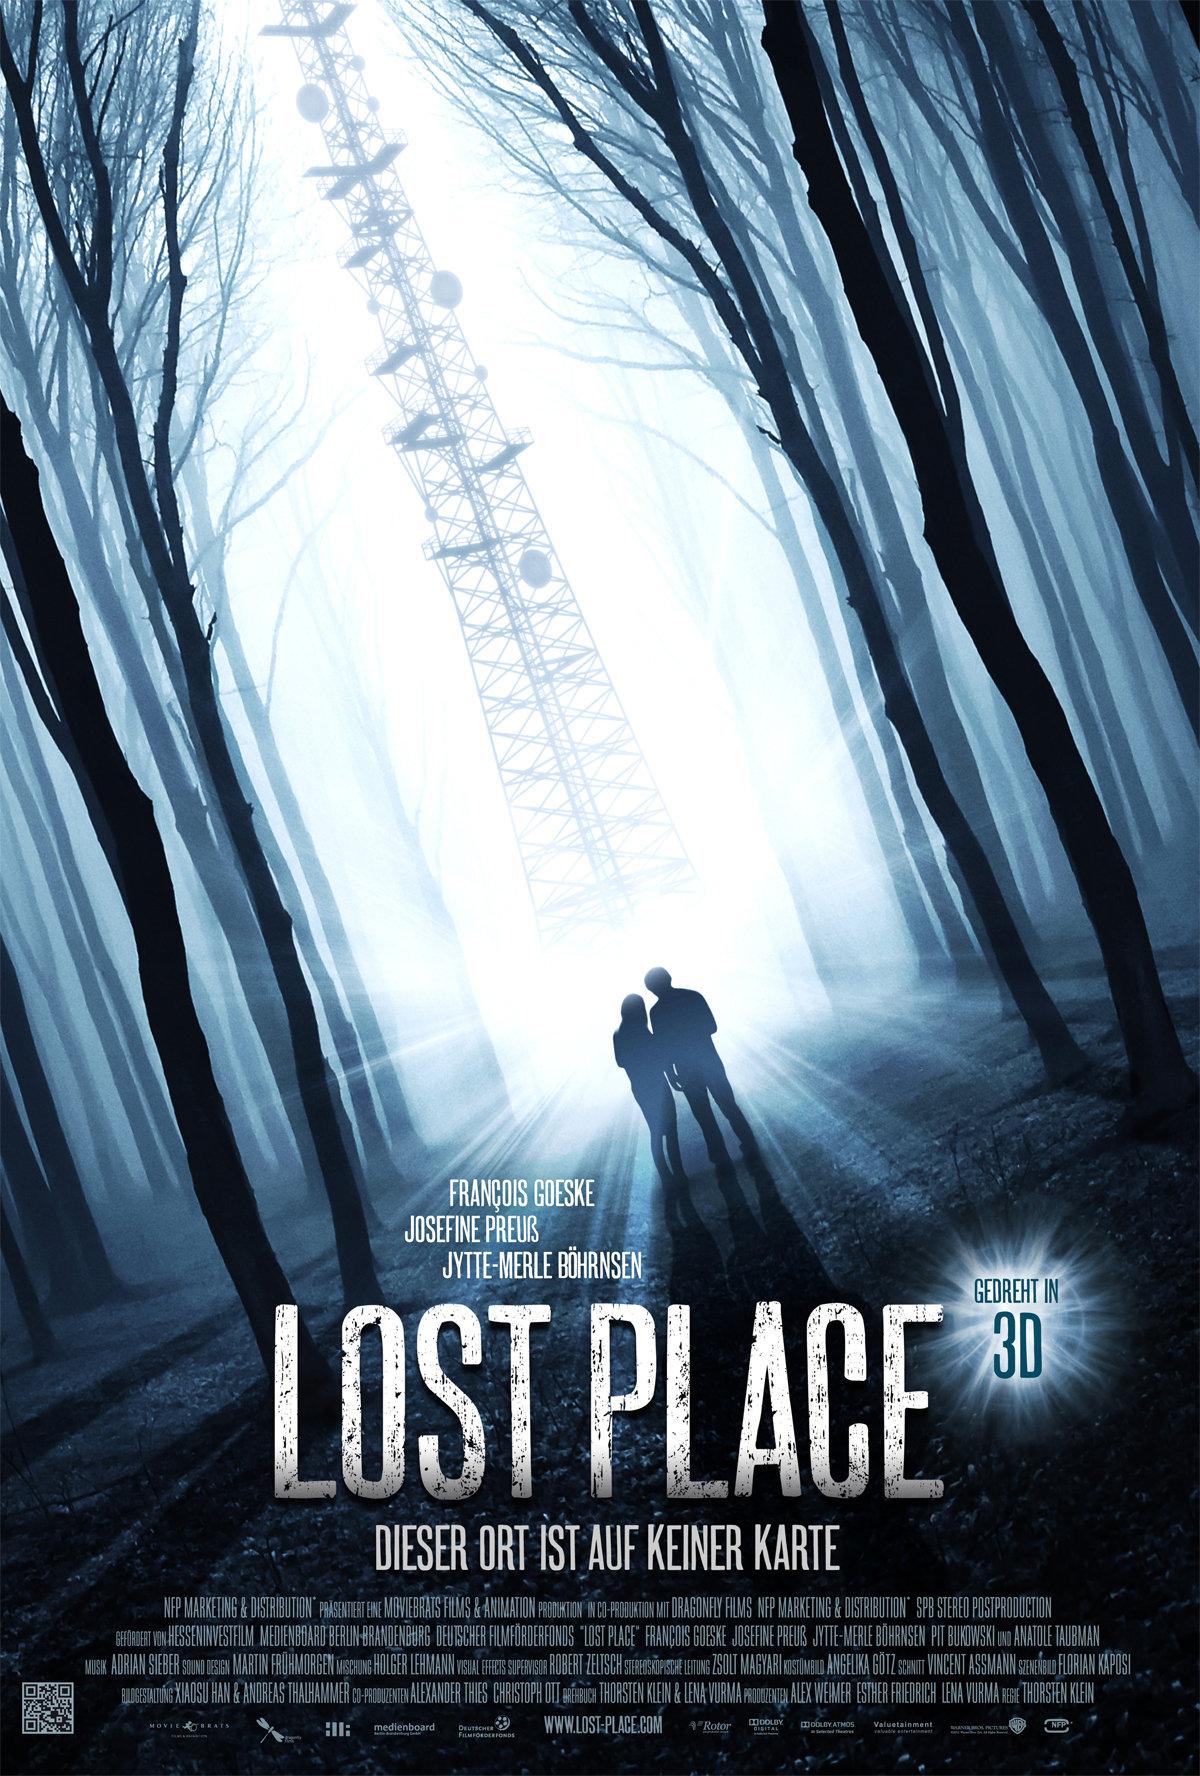 Pin Lost Place (2013) Movie and Pictures on Pinterest